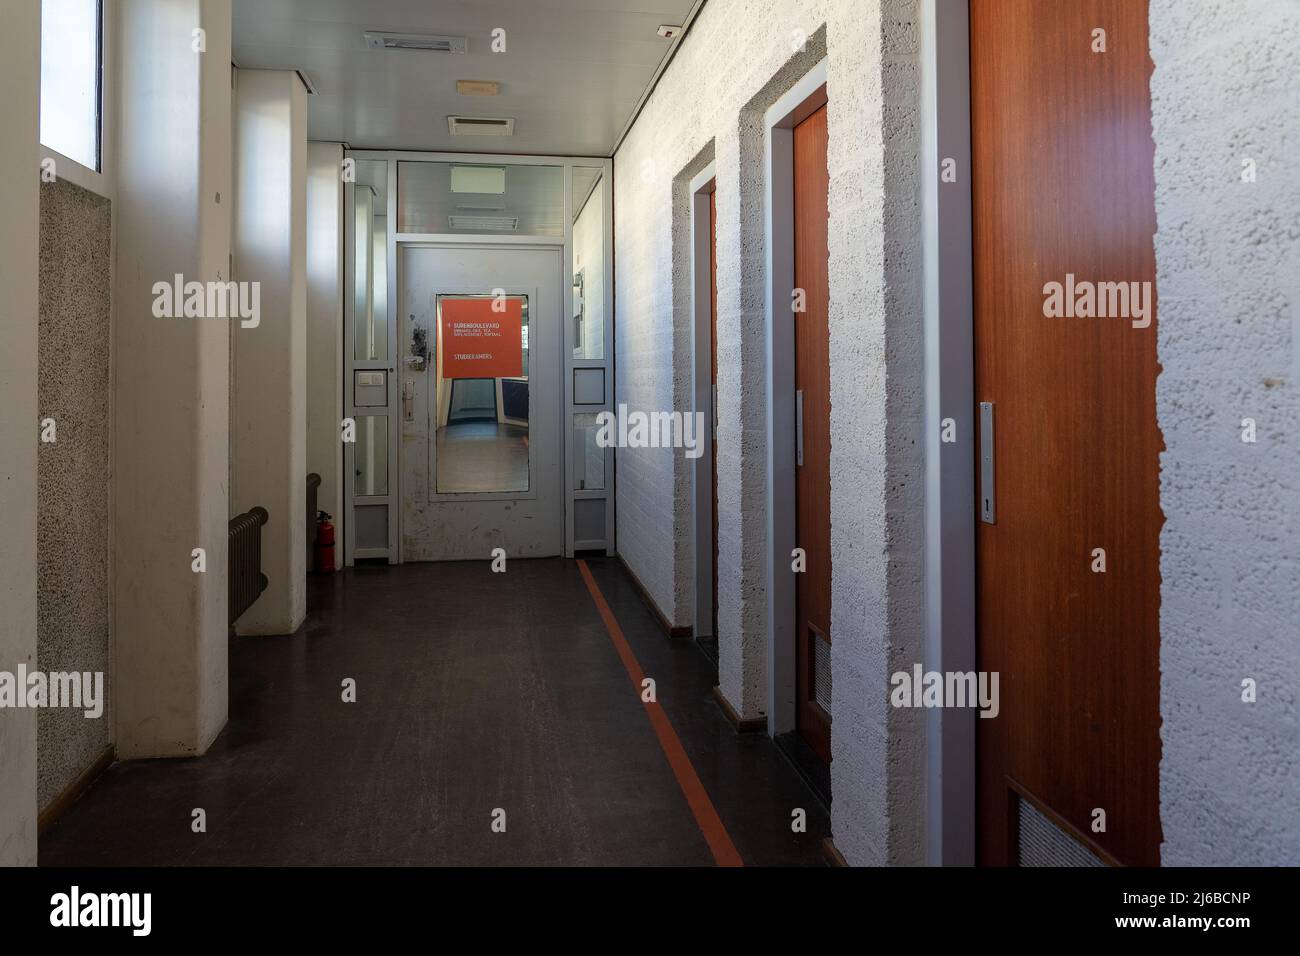 AMSTERDAM/NETHERLANDS-FEBRUARY 24: An empty corridor of a prison with tiles on the floor and open steel cell doors on which texts are scratched The ce Stock Photo